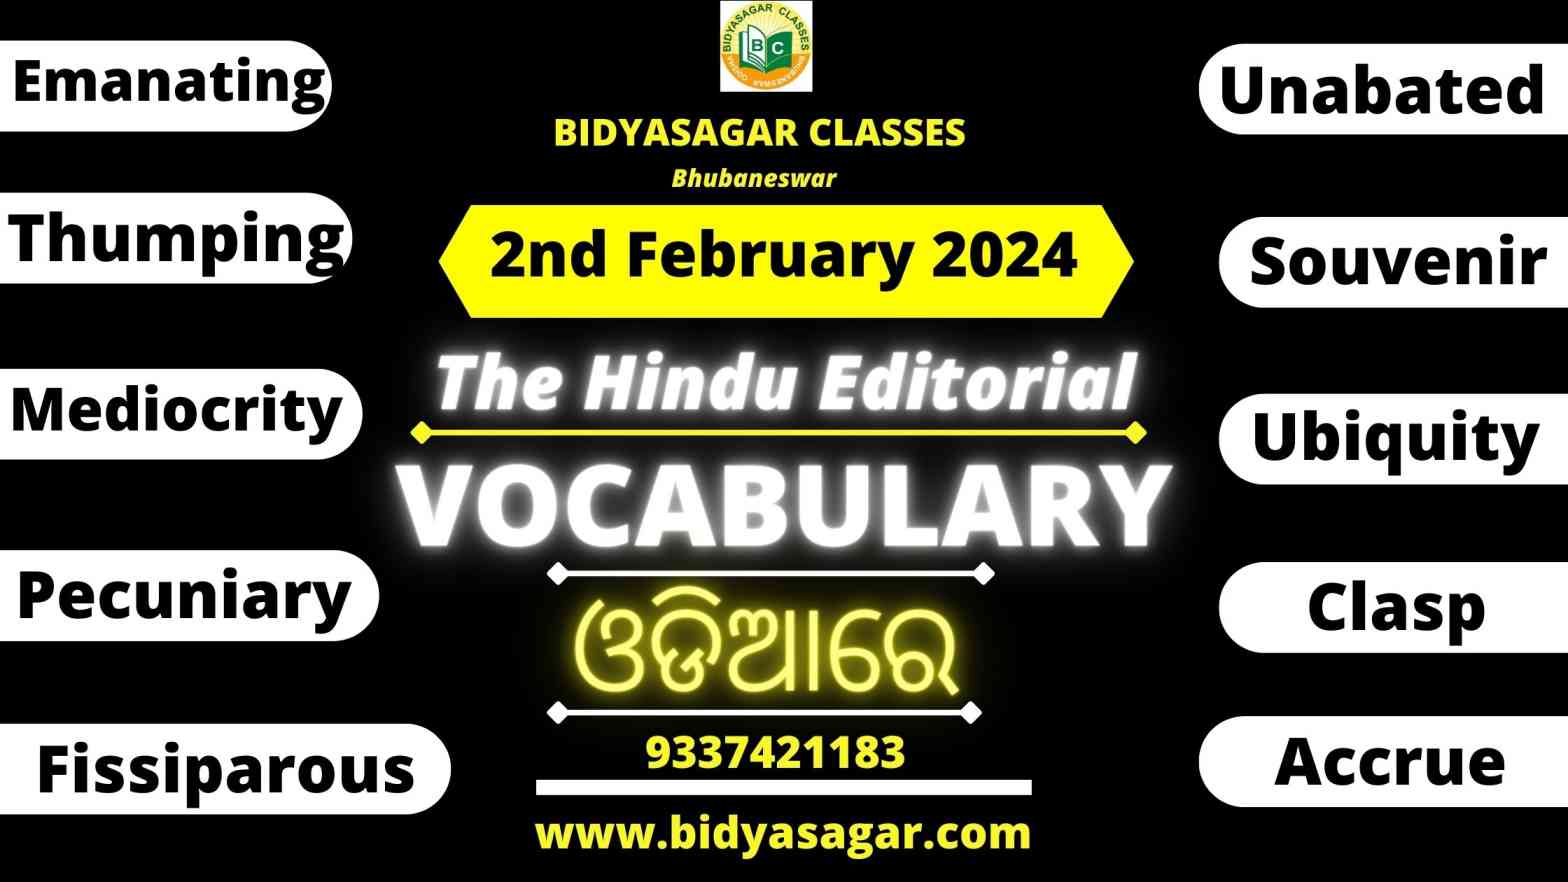 The Hindu Editorial Vocabulary of 2nd February 2024